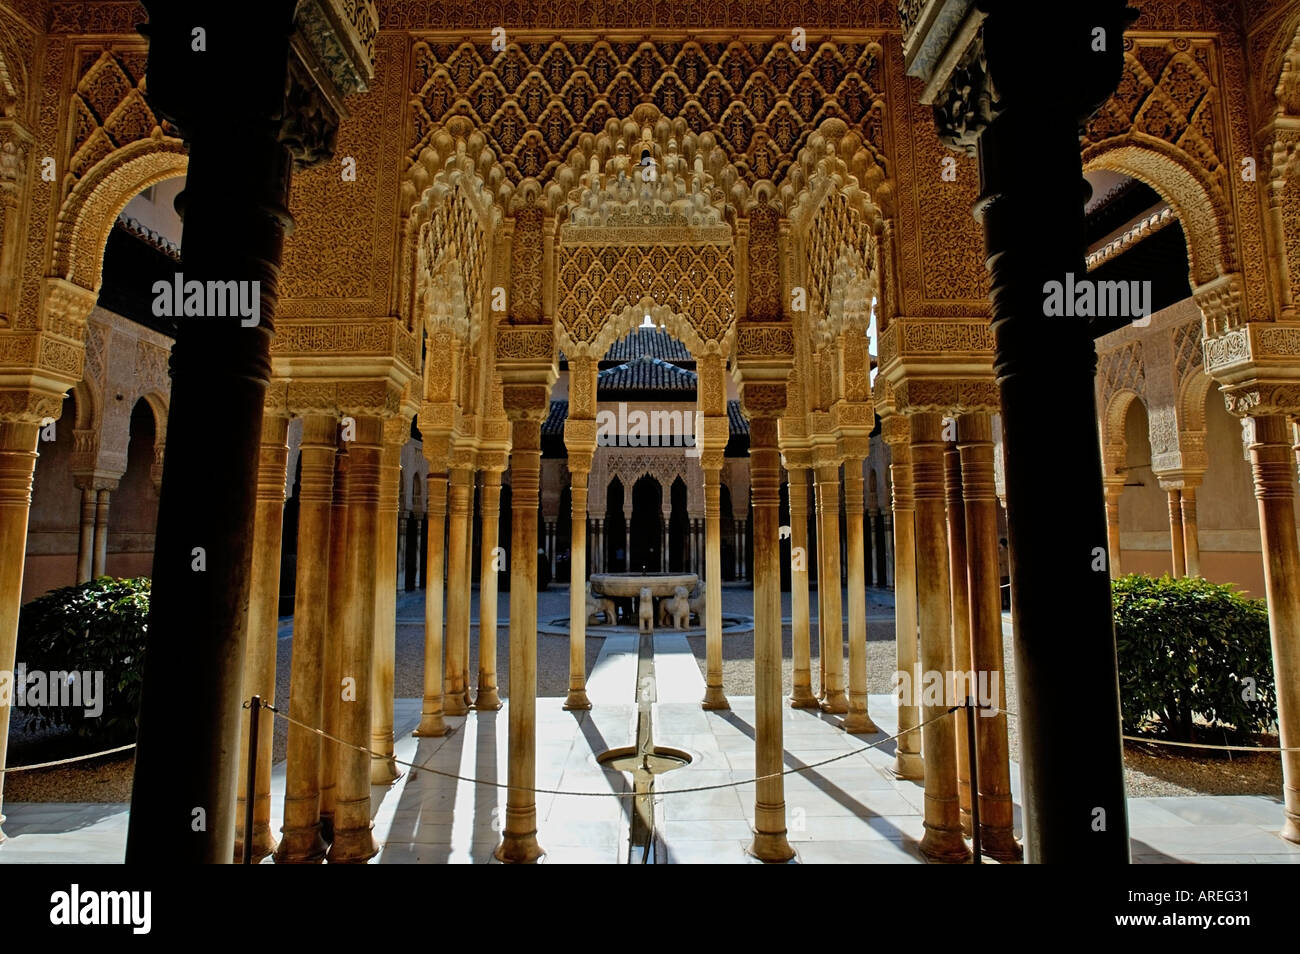 Inside the Alhambra. The Nasrid Palace.